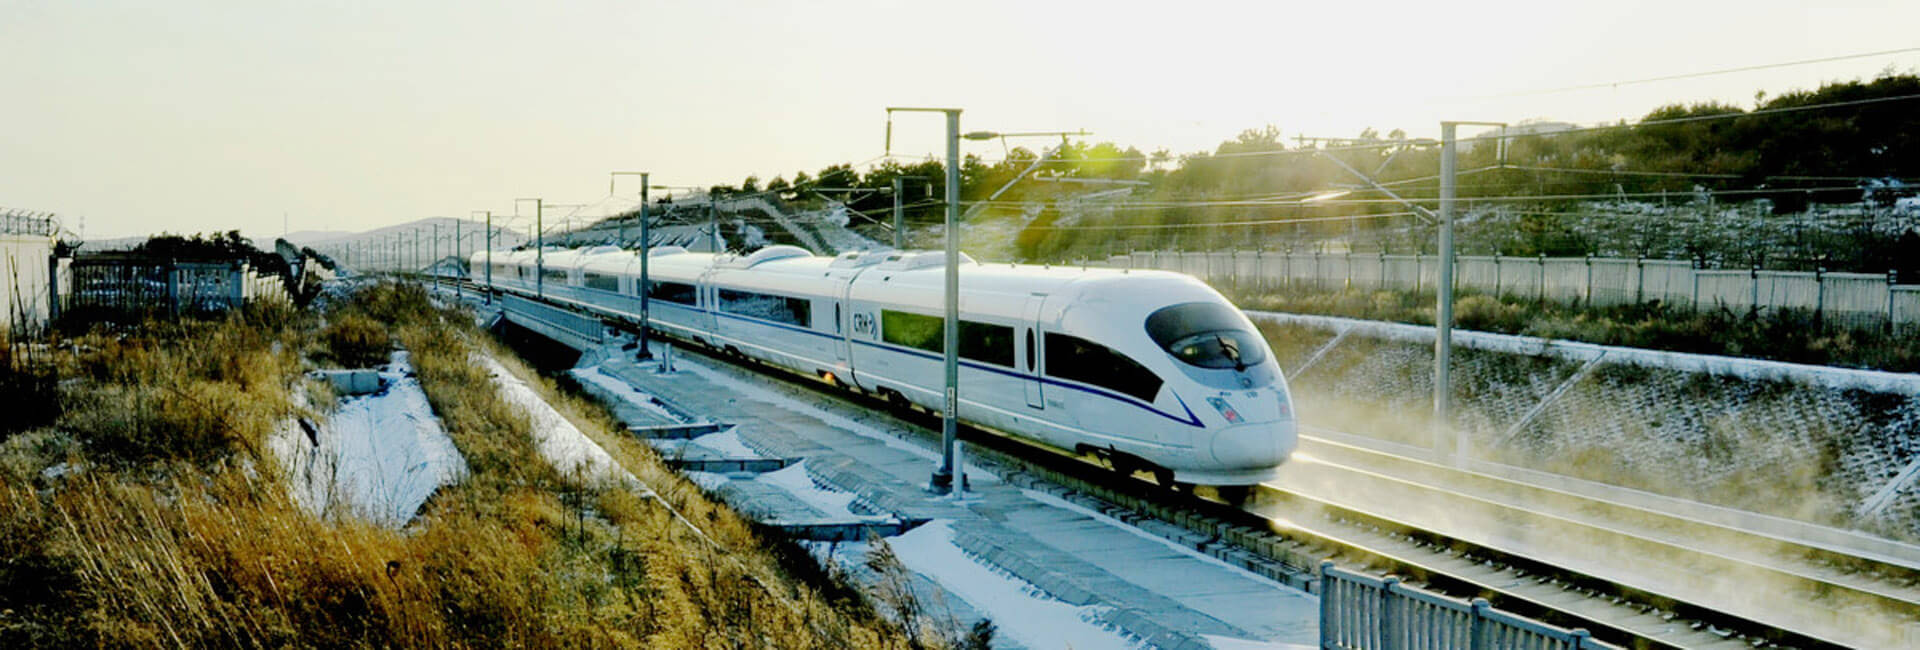 6 Days Amazing Snow Ice Tour from Beijing by High Speed Train